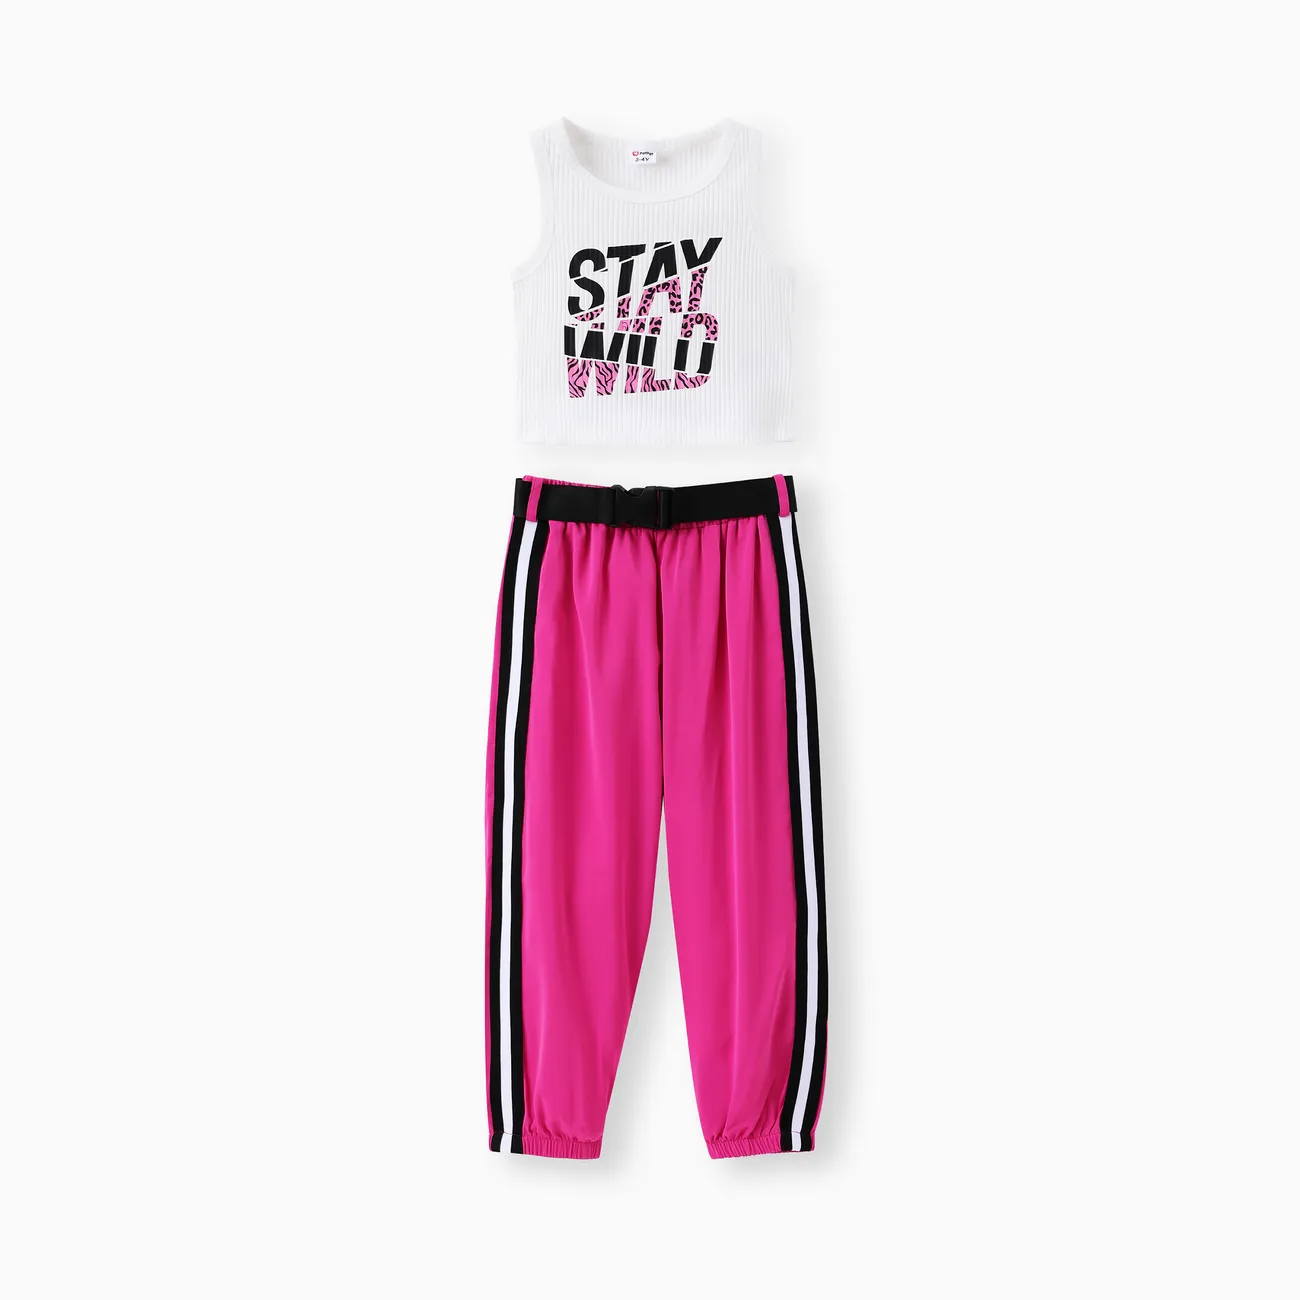 Toddler Girl 3pcs Sporty Letter Print Tank Top and Sweatpants with Belt Set White big image 1